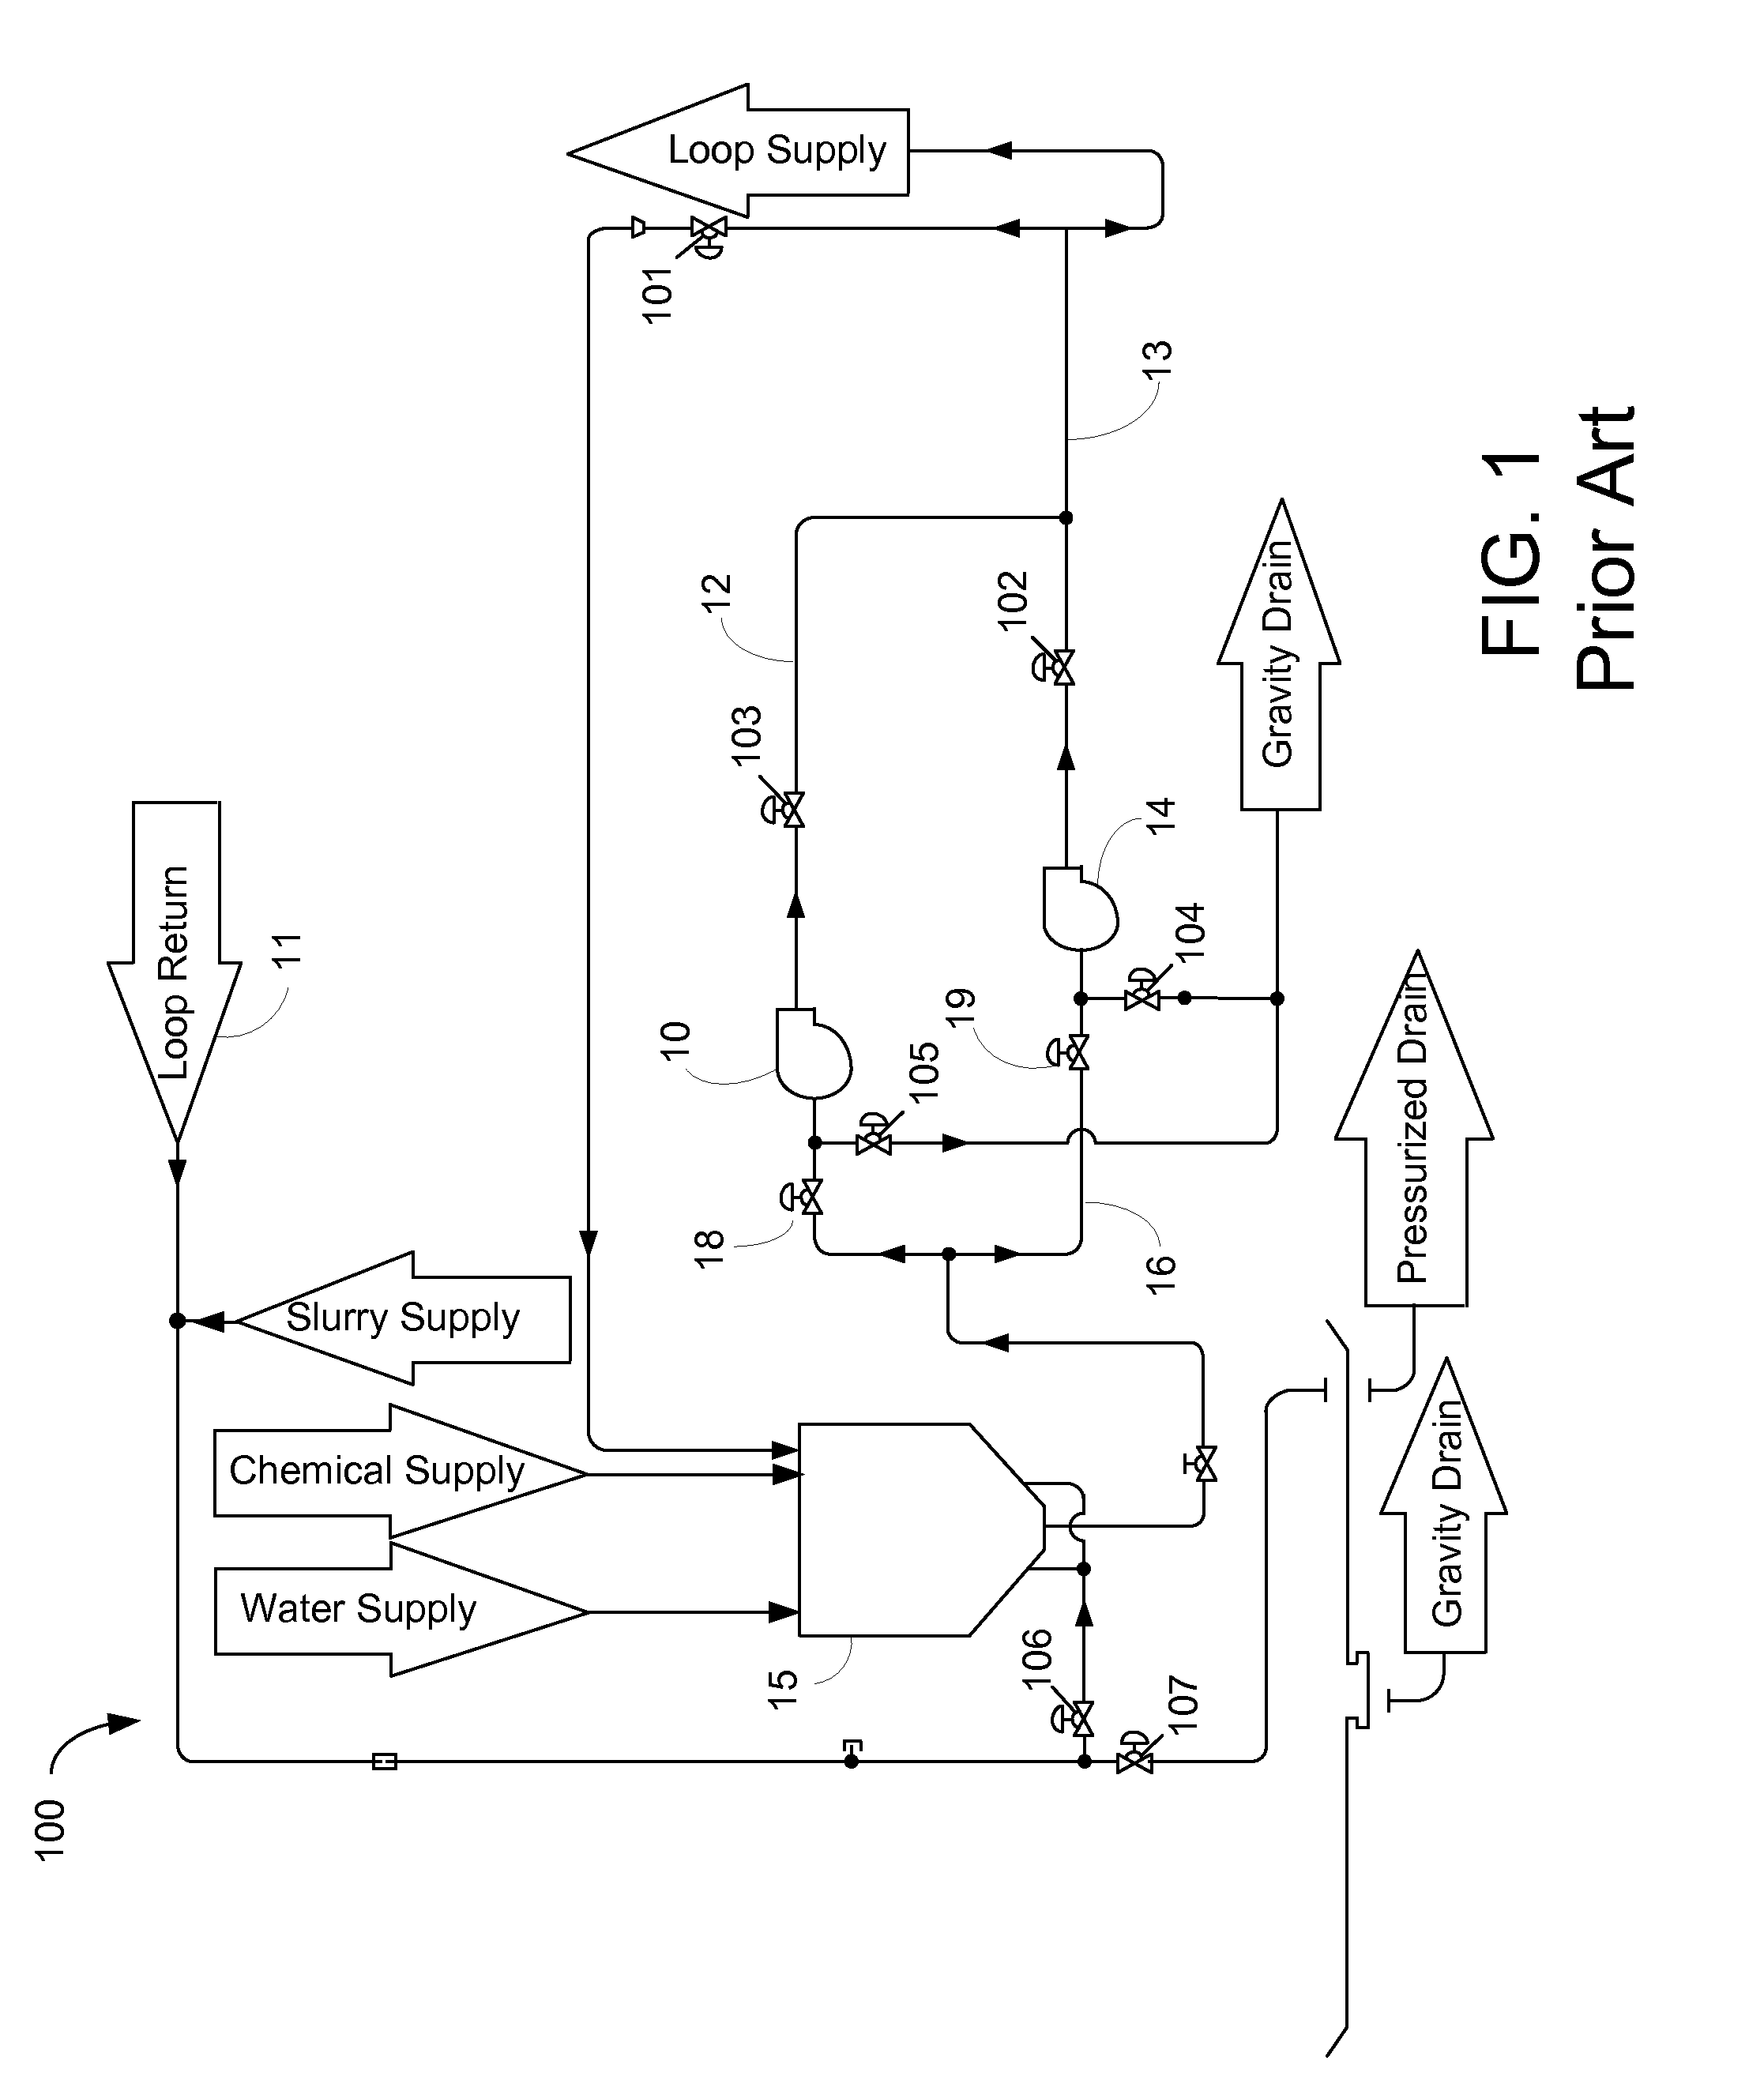 Arrangement of multiple pumps for delivery of process materials